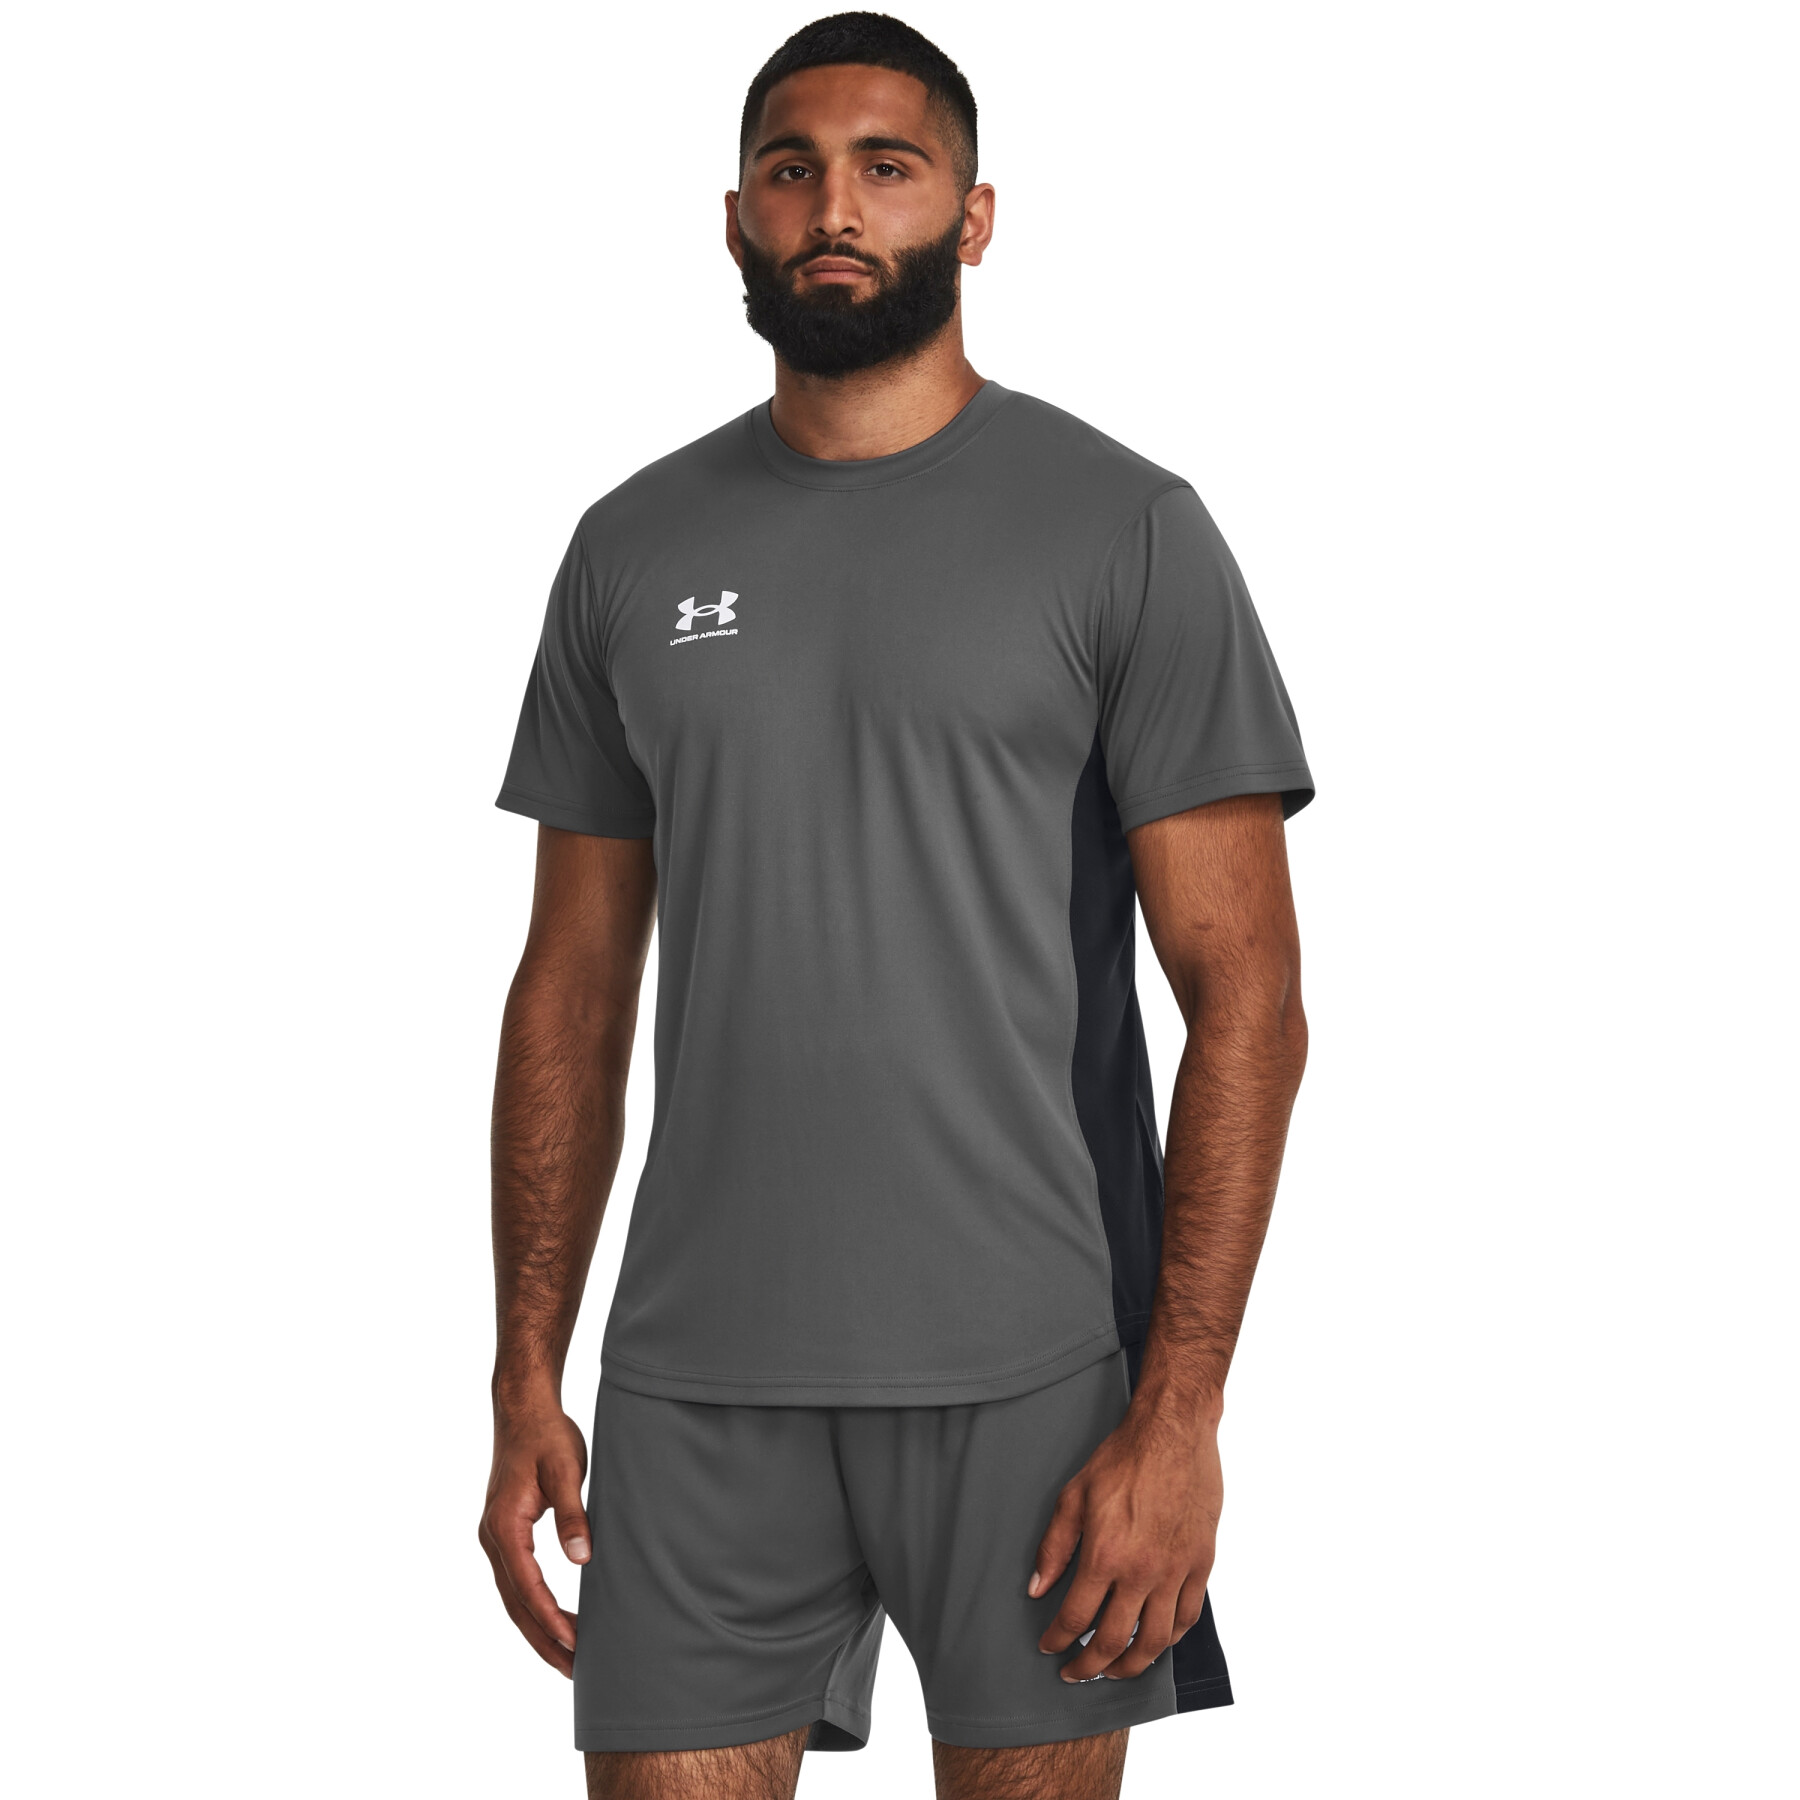 Maillot Under Armour Challenger